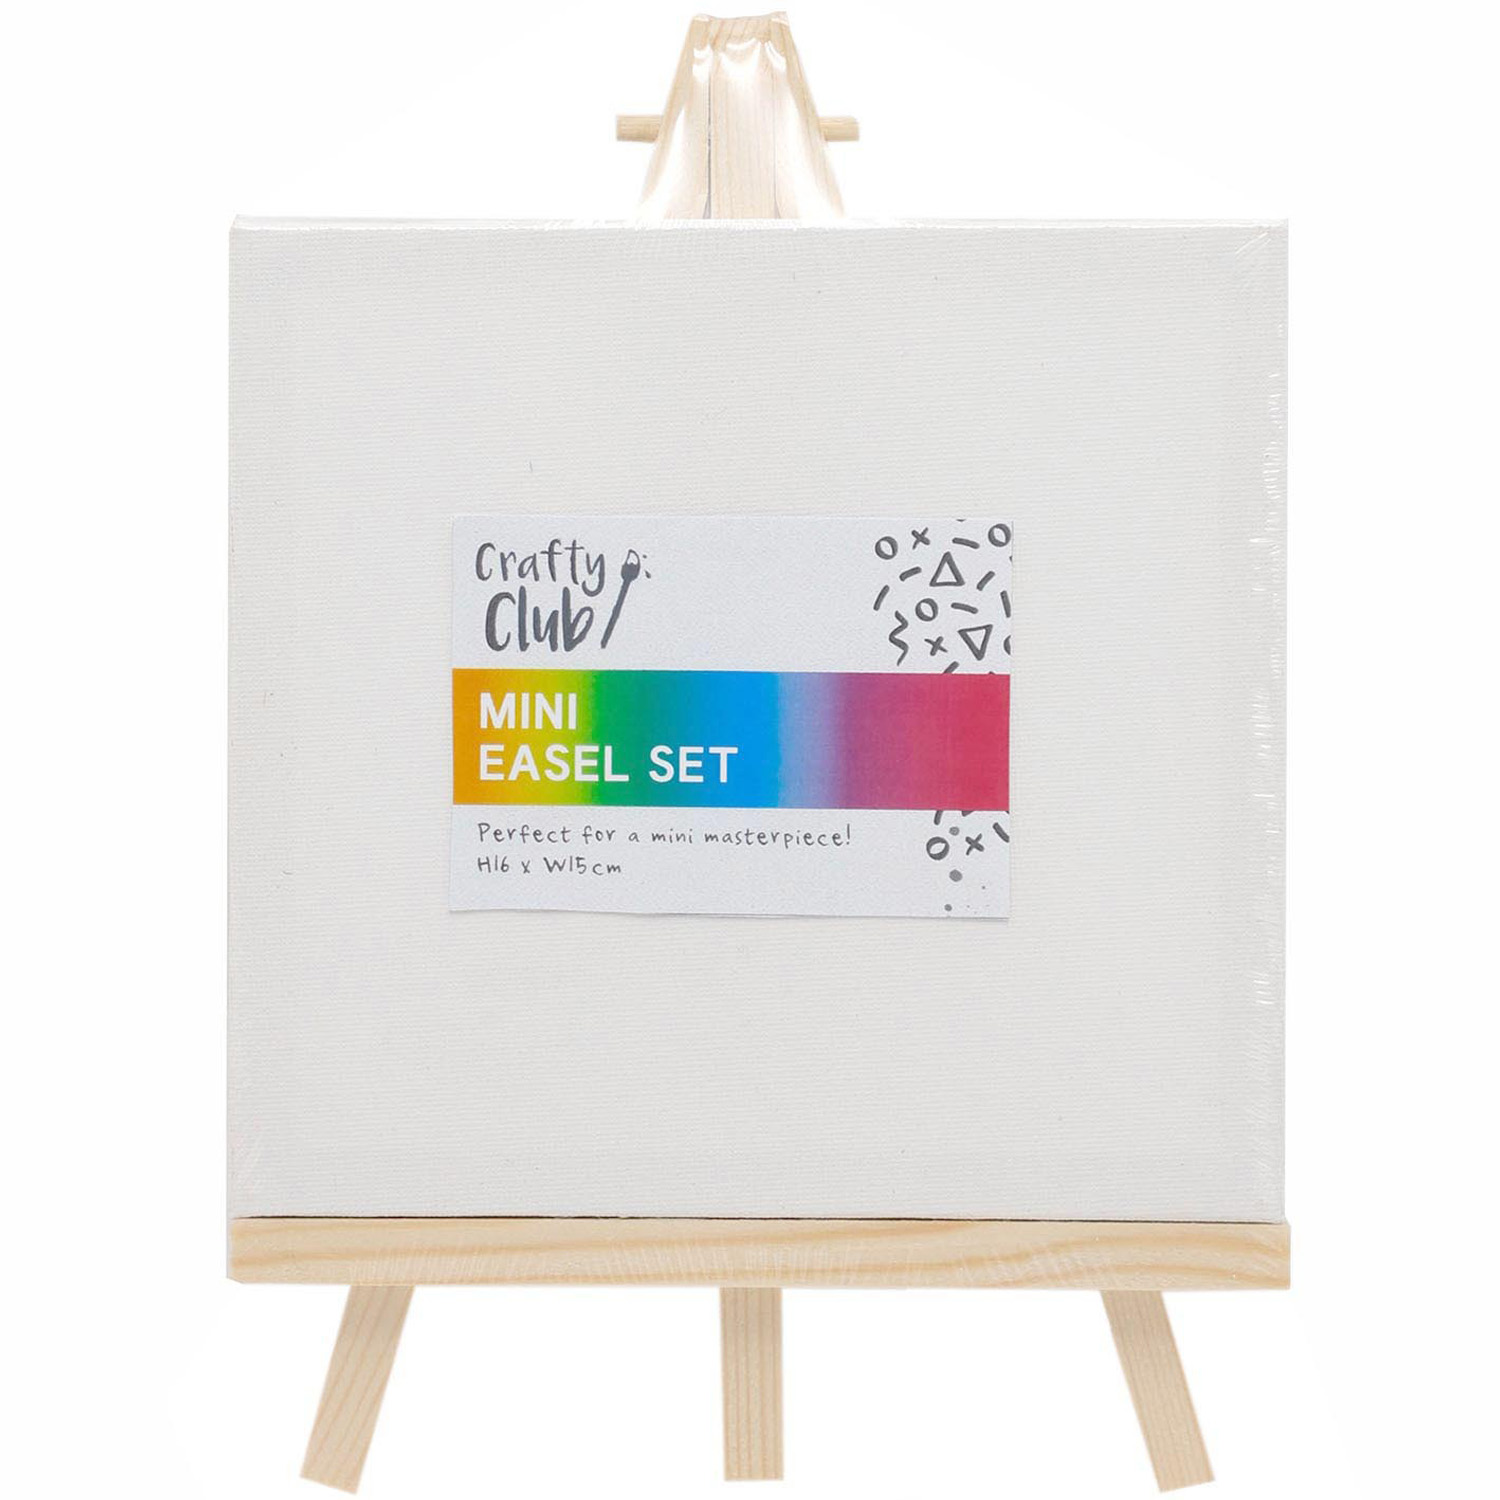 Crafty Club Mini Easel and Canvas Set Image